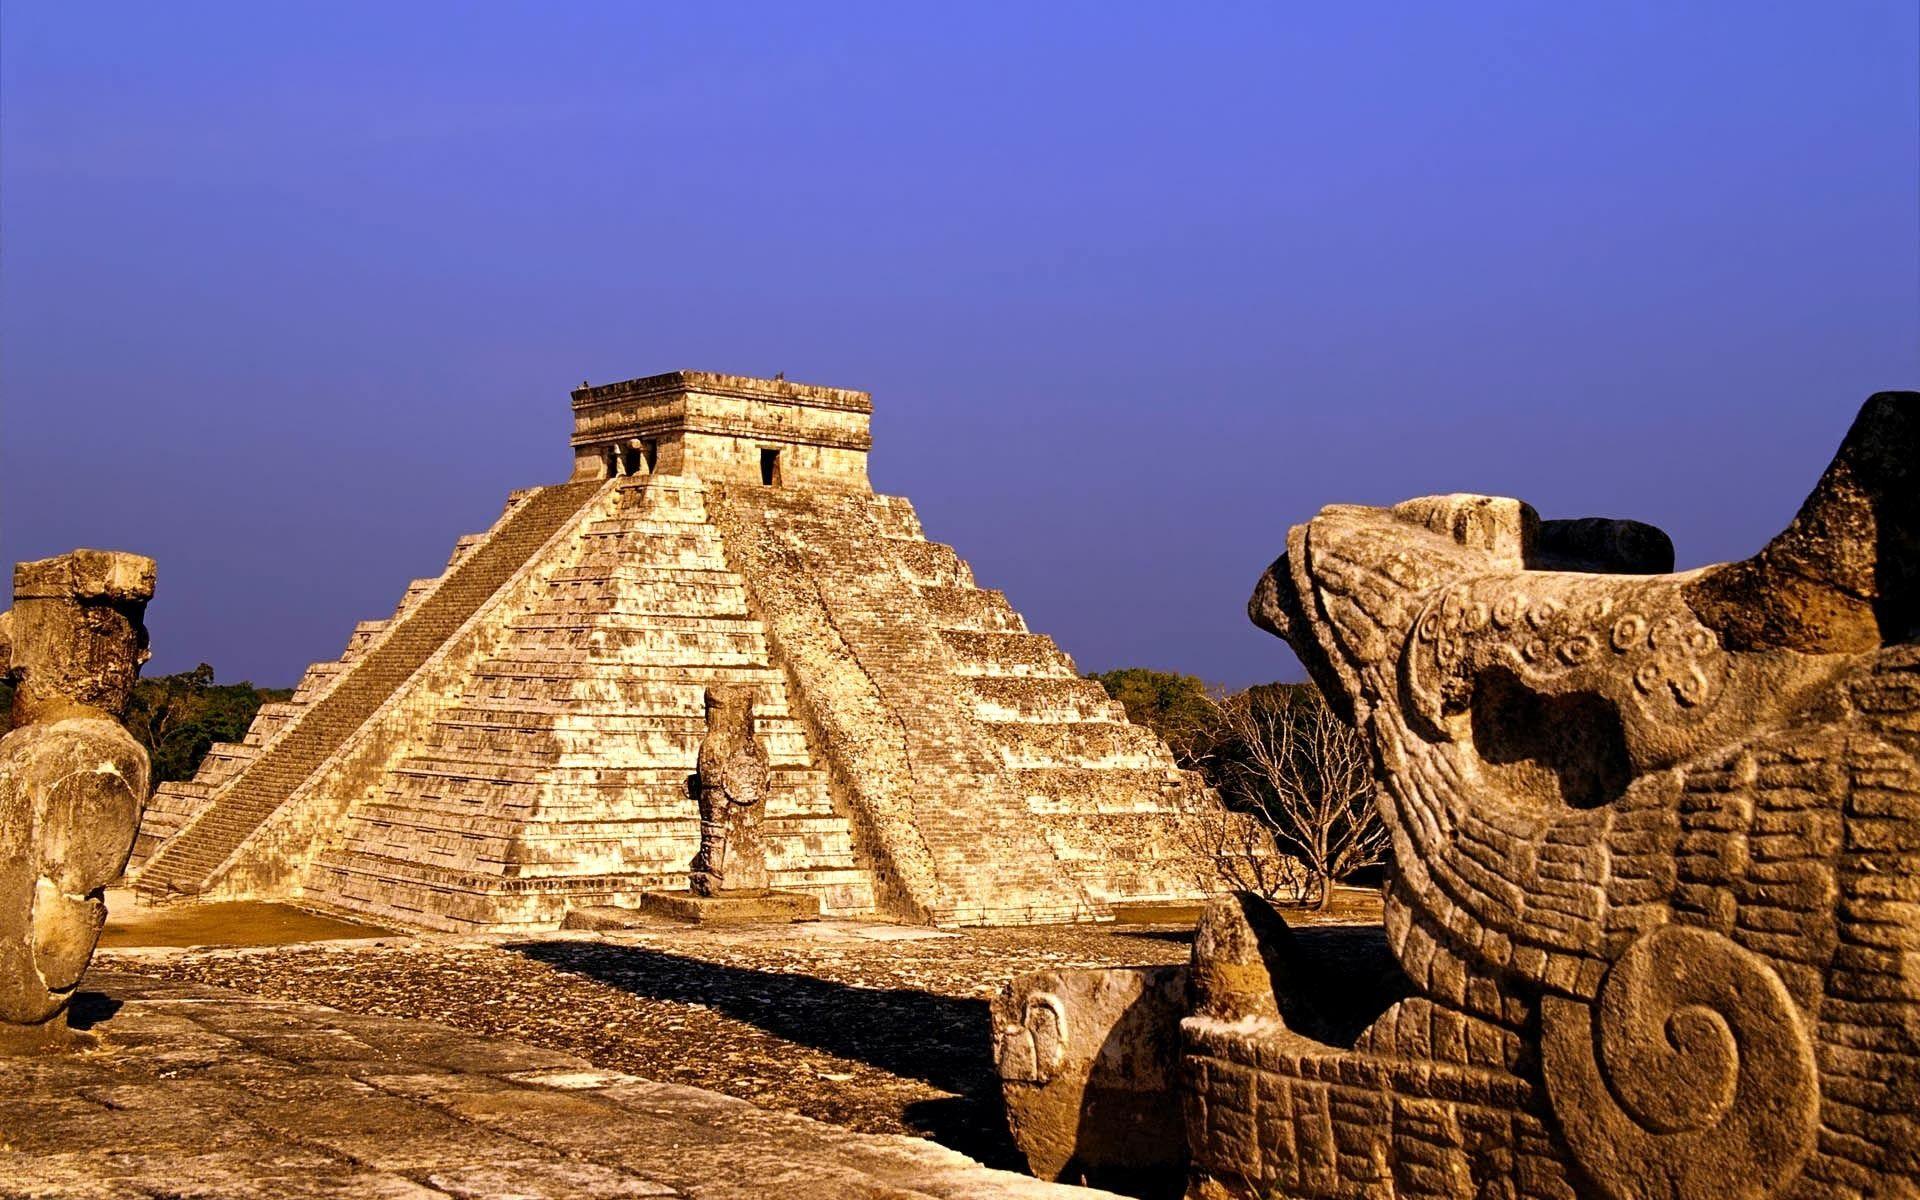 The ruins of Chichen Itza are located in the northern center of